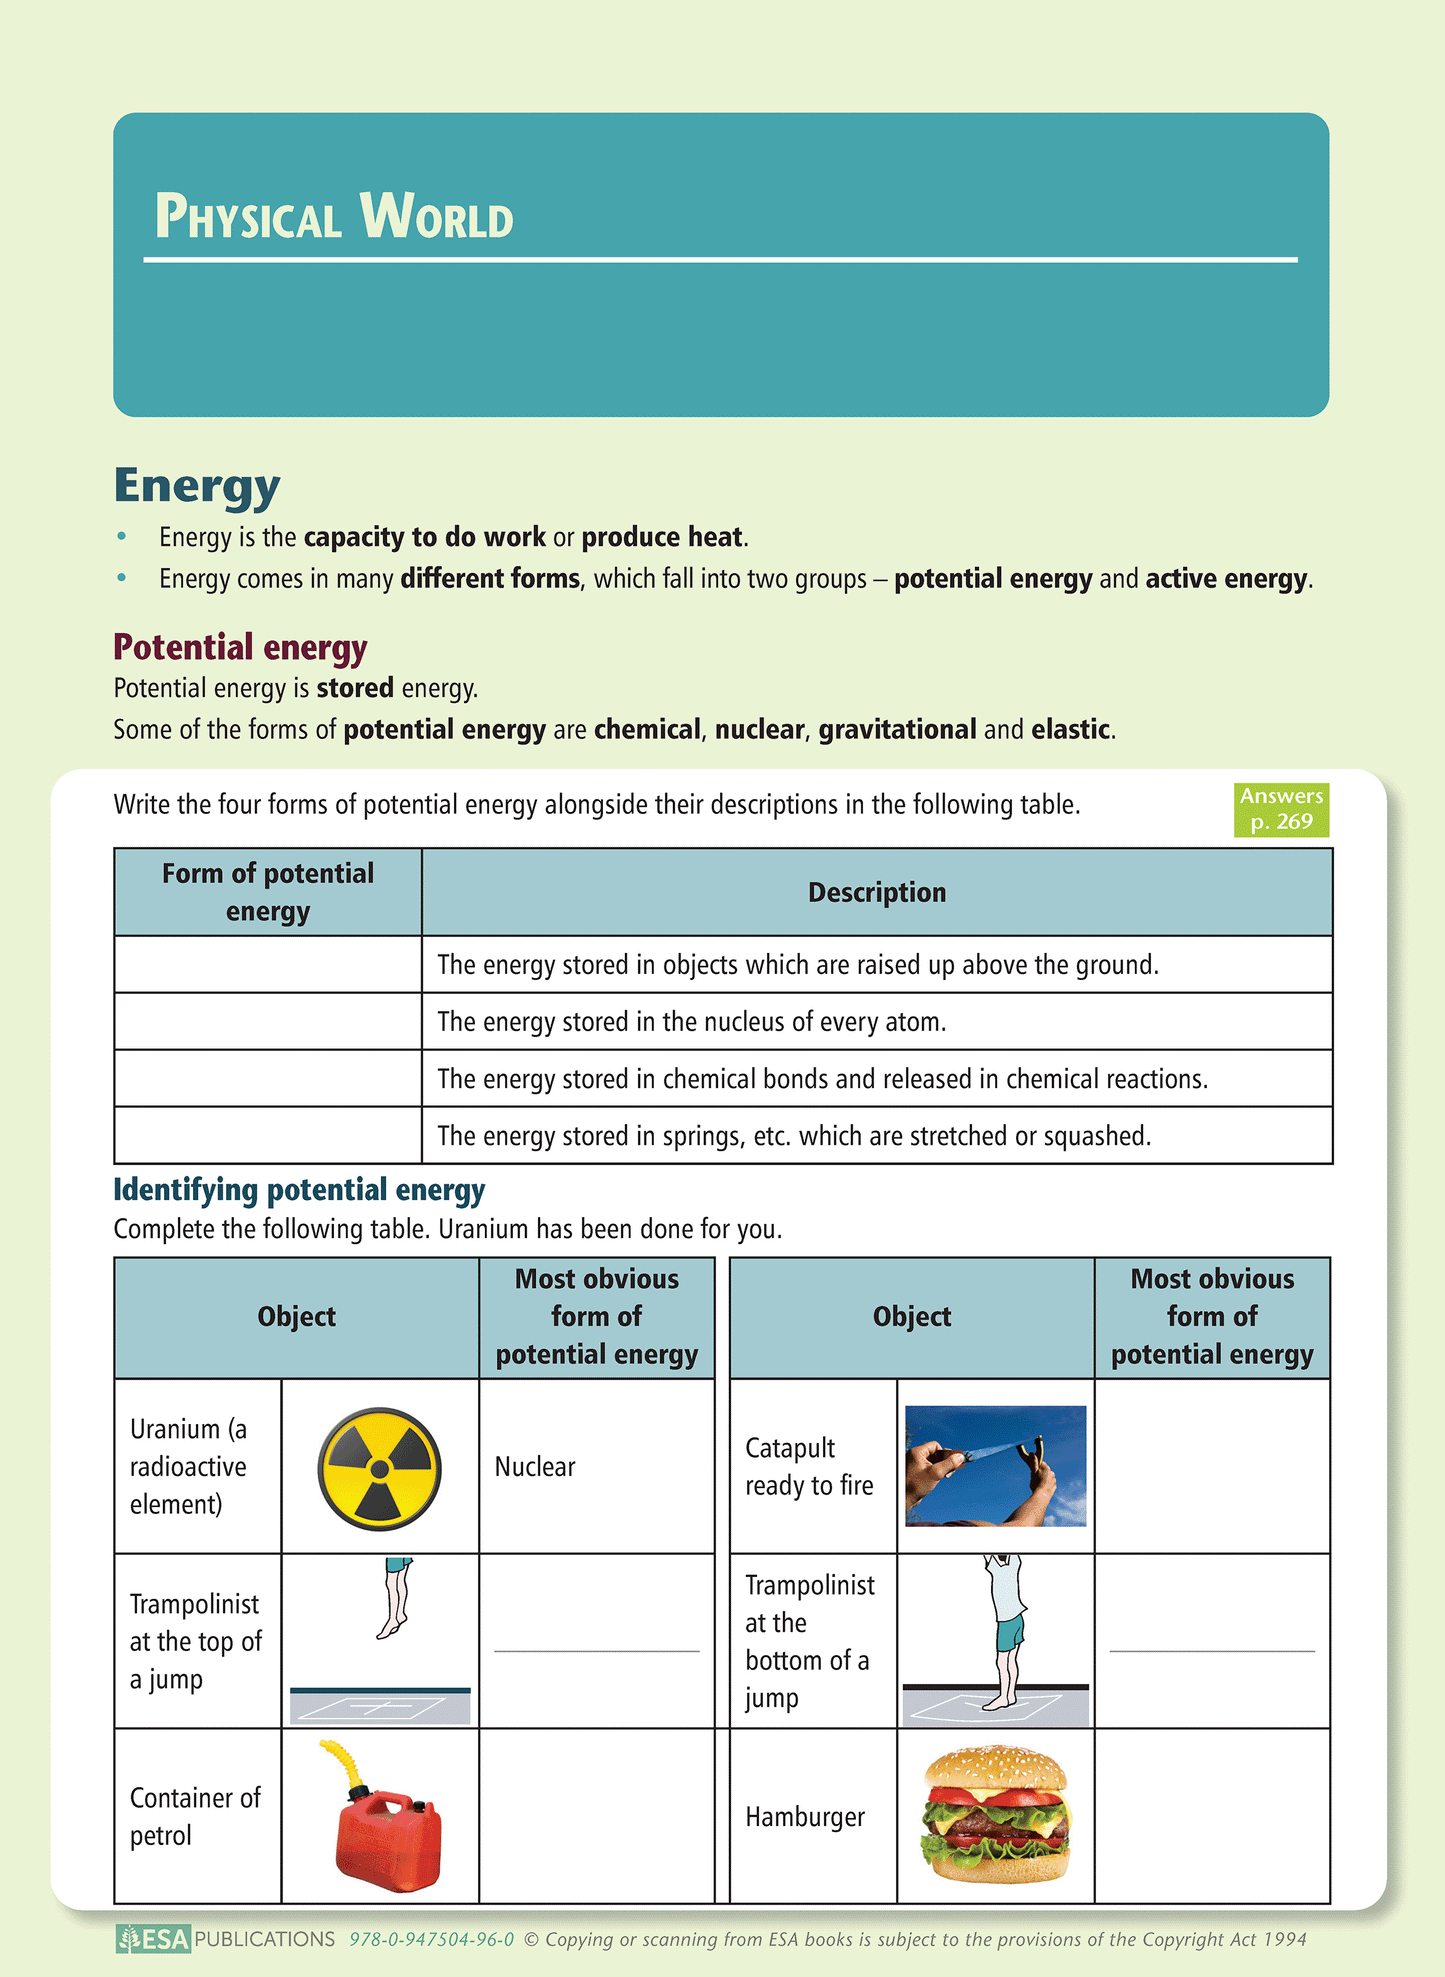 Year 9 Science Learning Workbook - SPECIAL (damaged stock at $10 each)